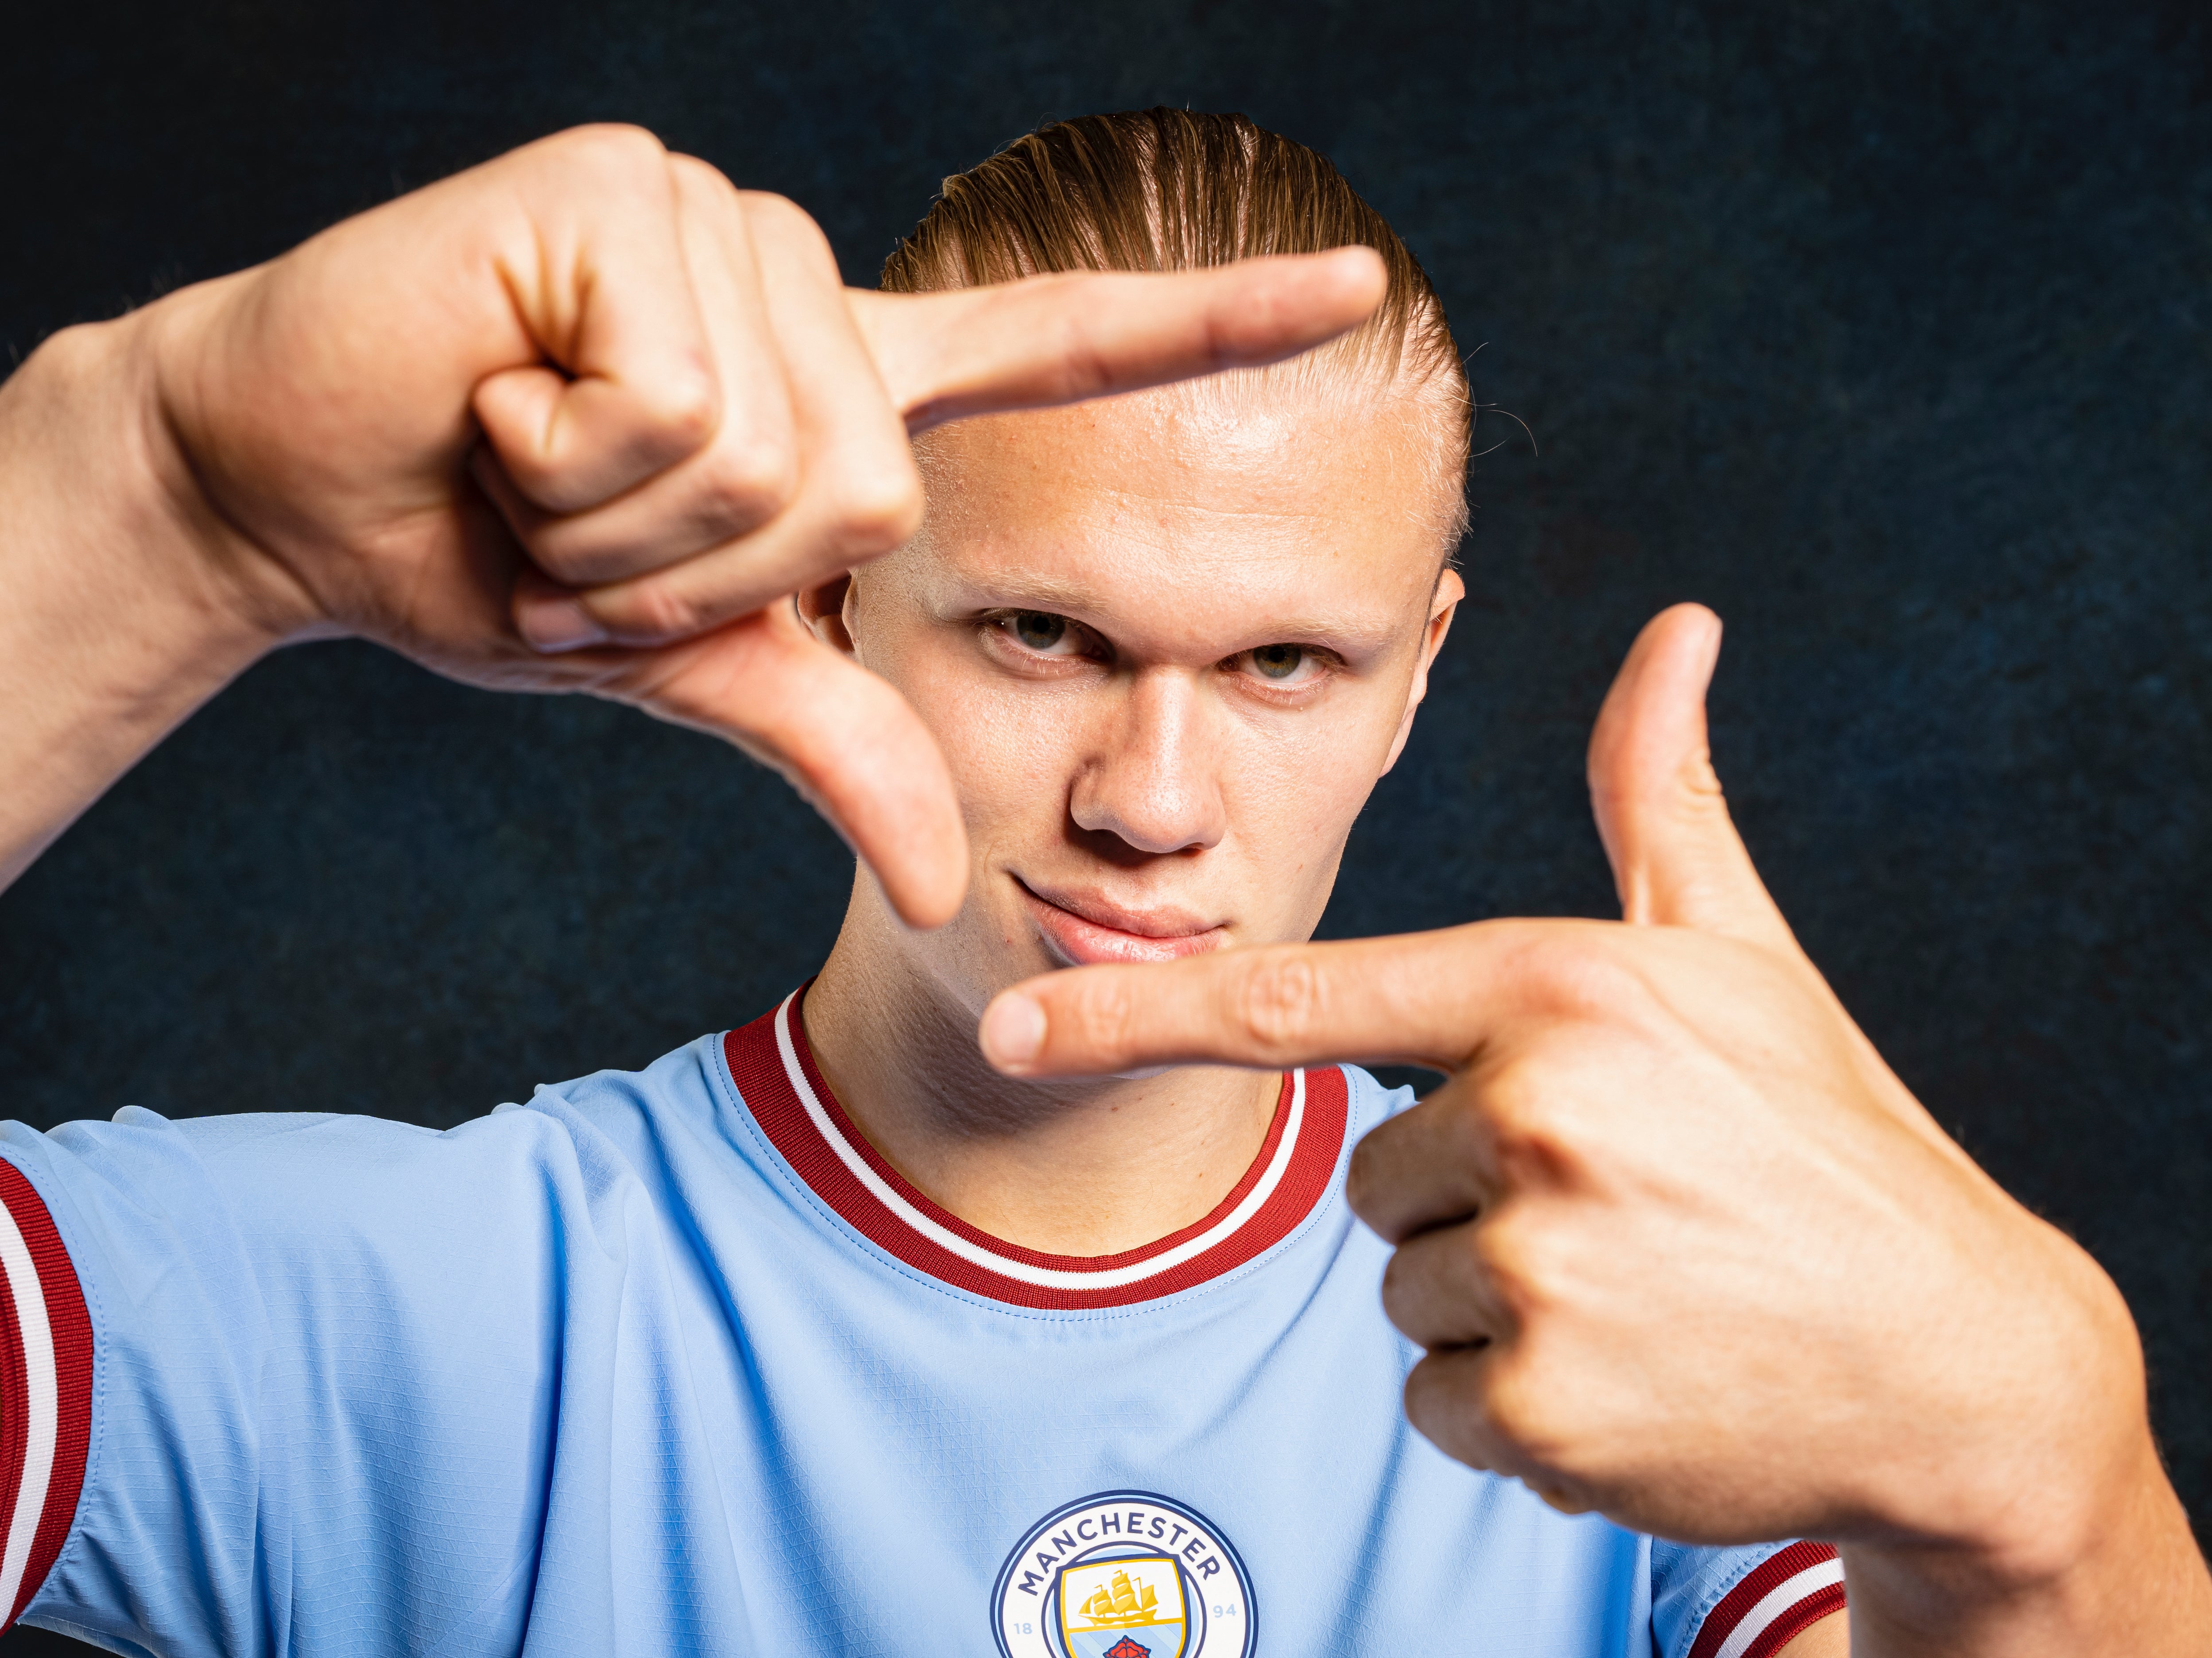 Erling Haaland is a Manchester City player